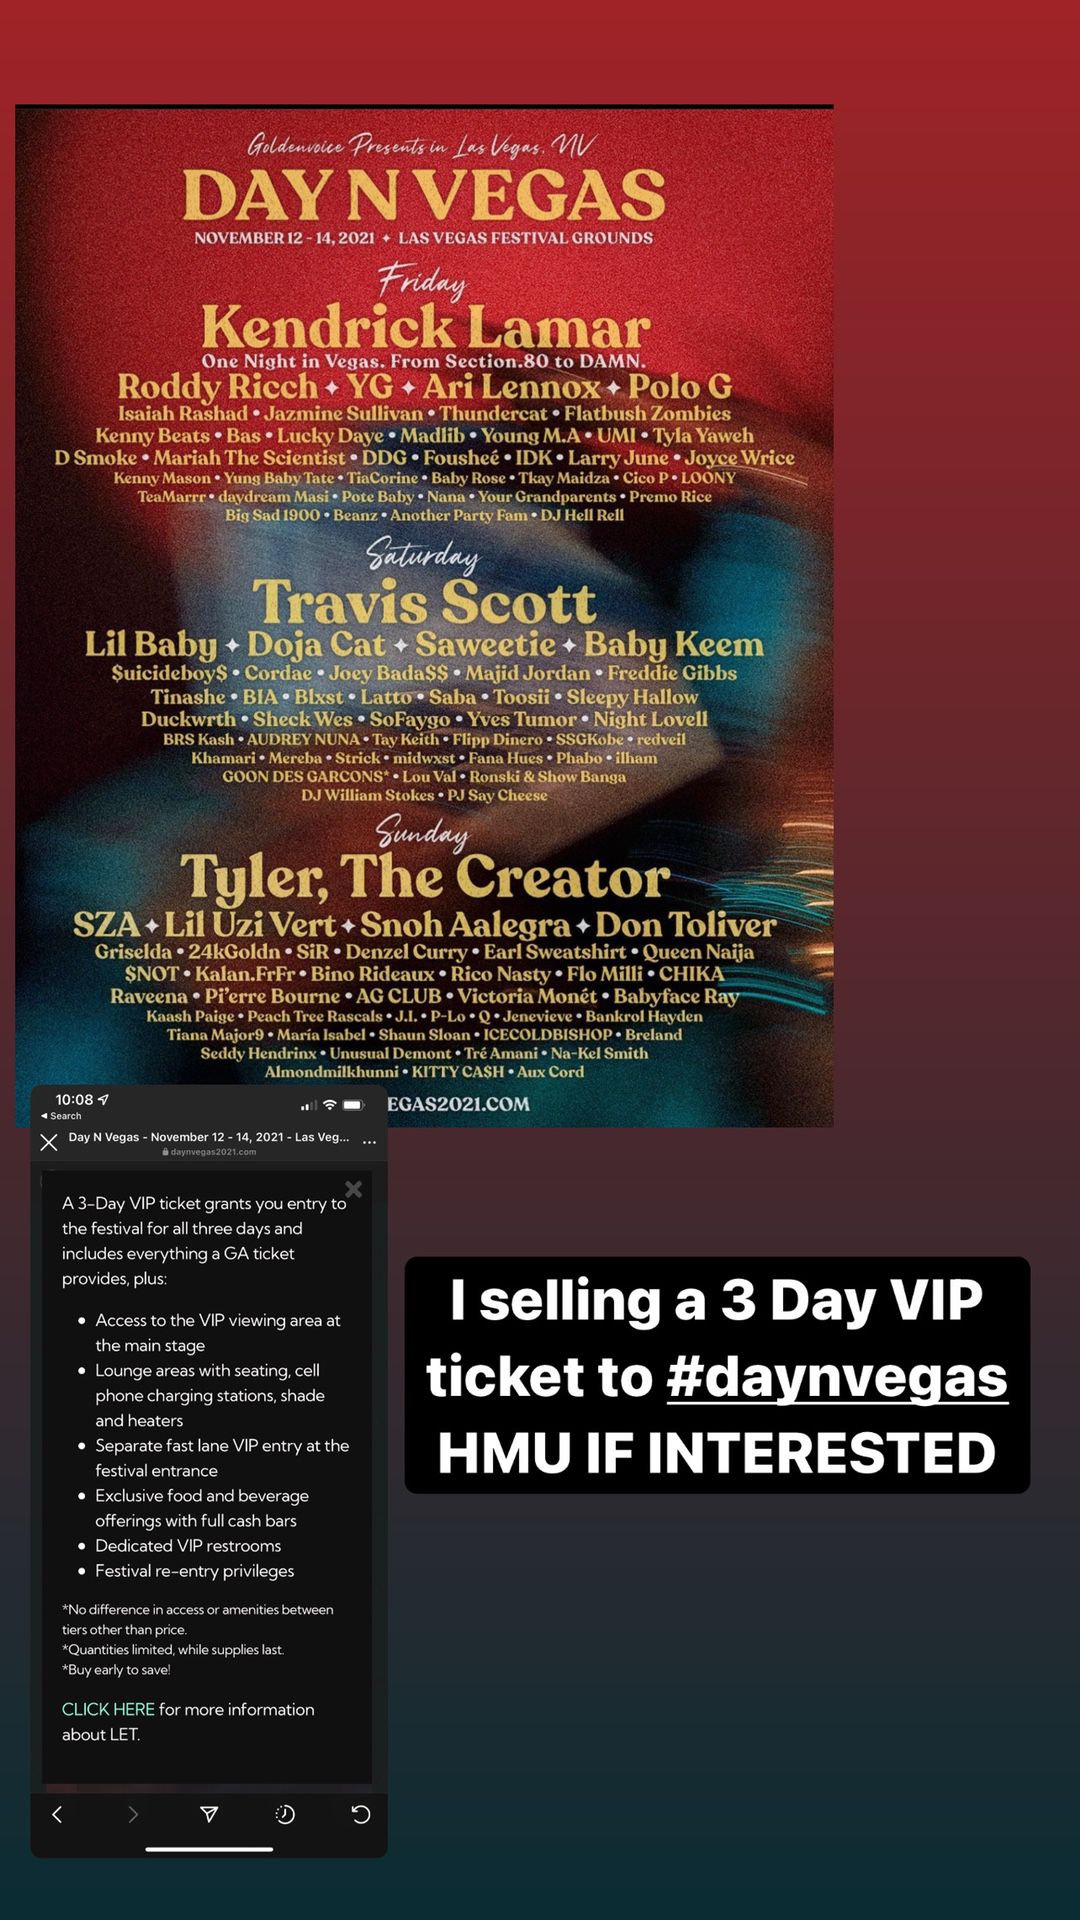 3 Day VIP Ticket For Daynvegas 